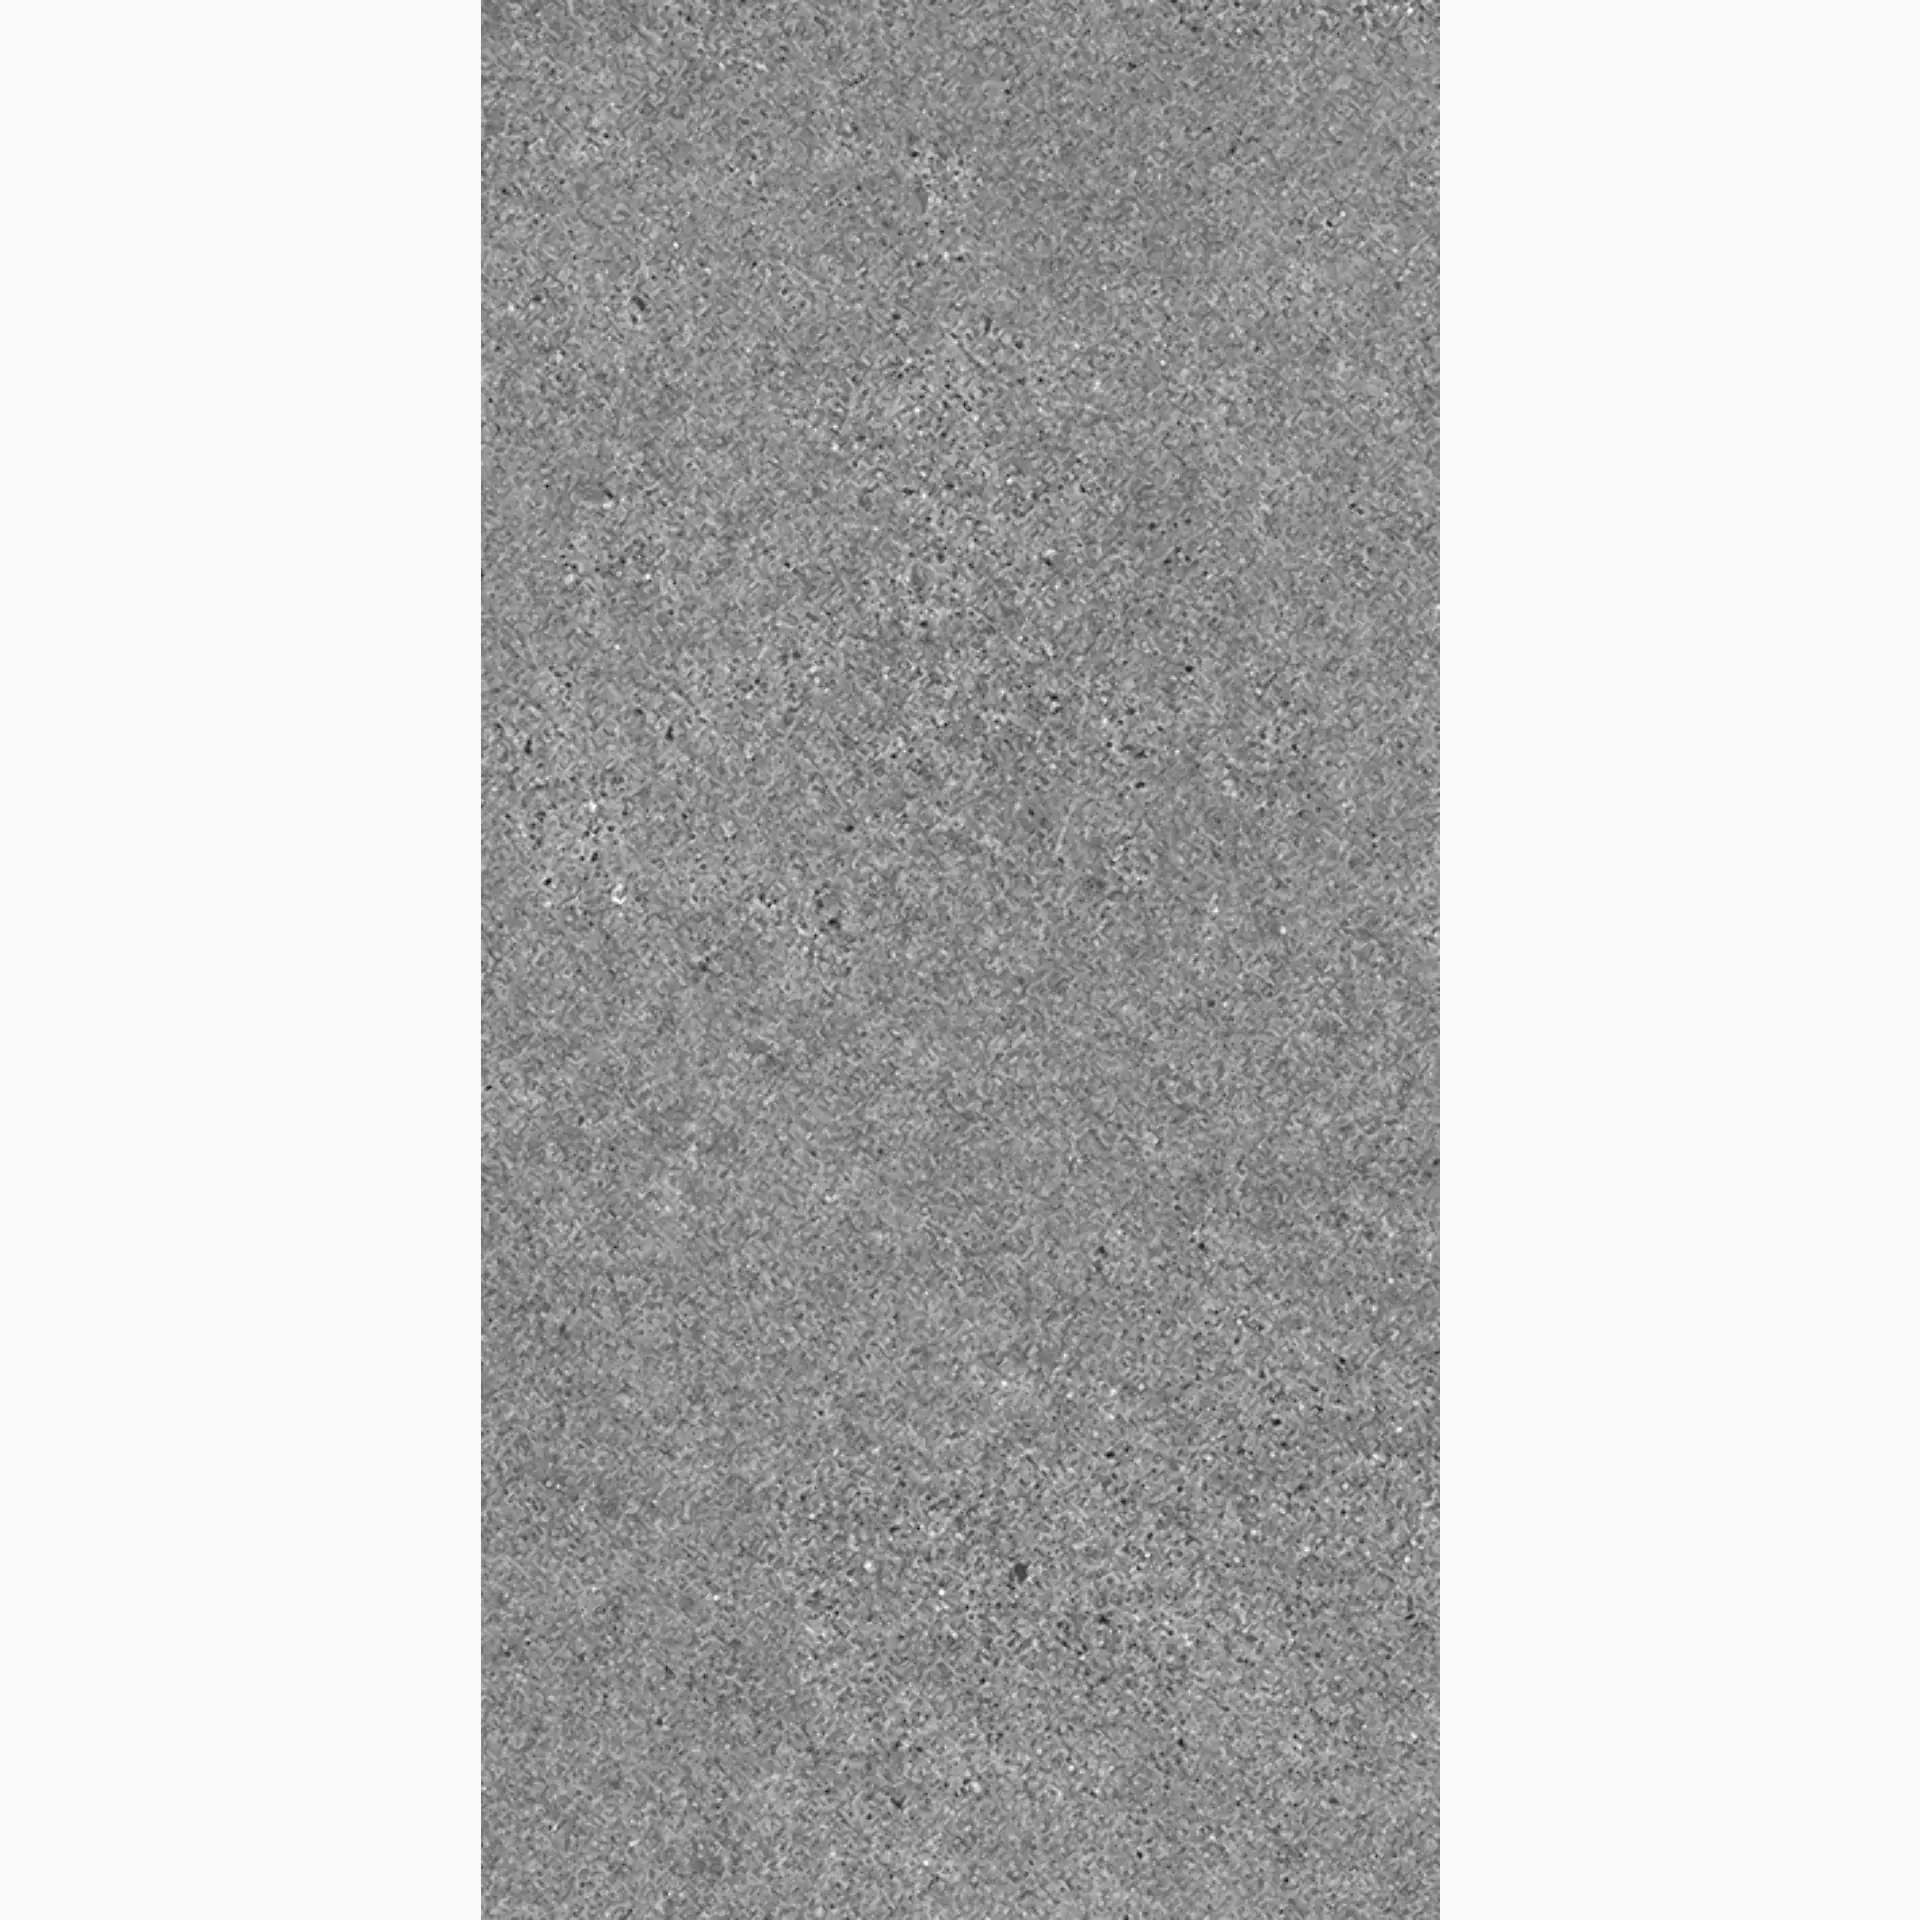 Villeroy & Boch Solid Tones Pure Stone Antislip 2521-PS61 30x60cm rectified 10mm